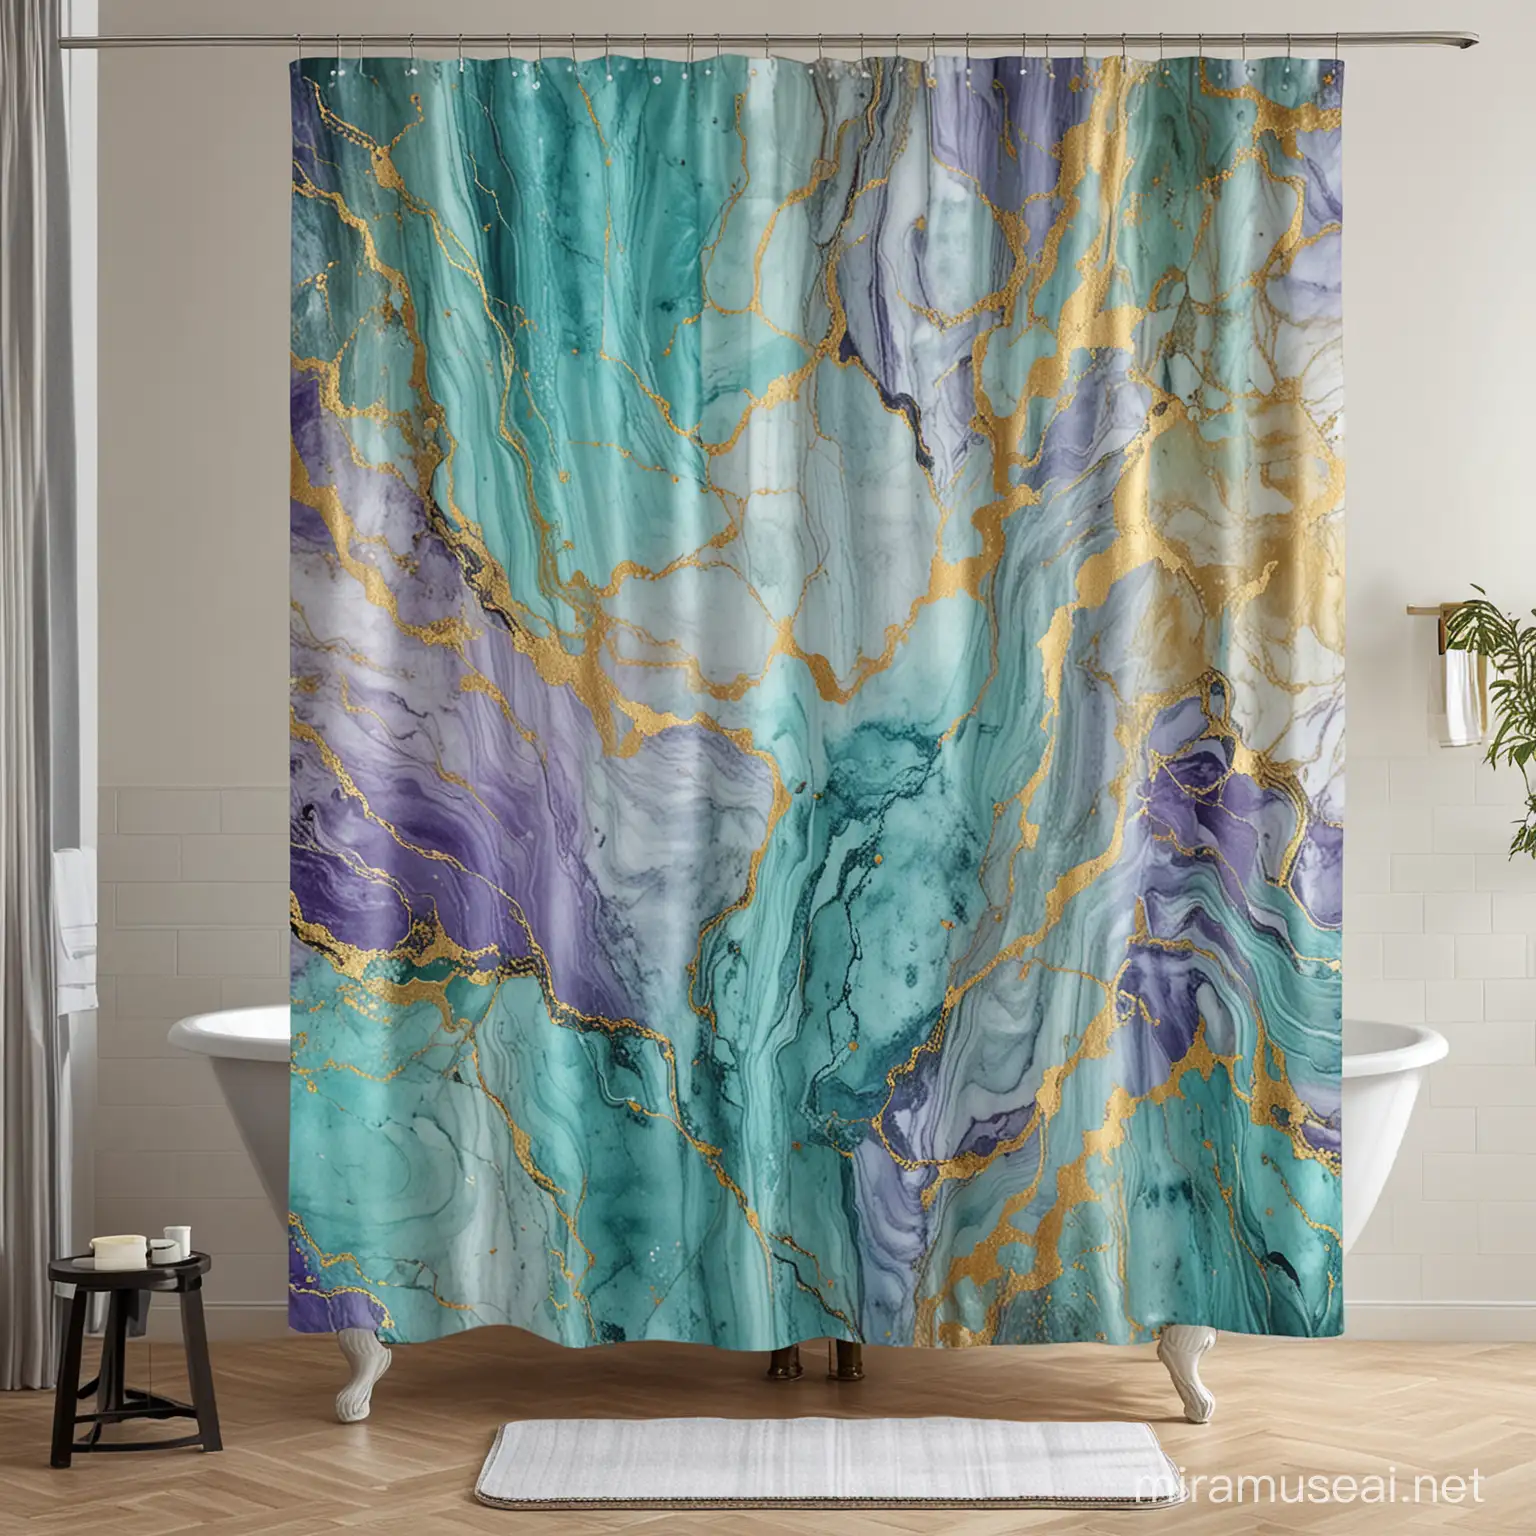 Blue green purple and golden textured marble shower curtain